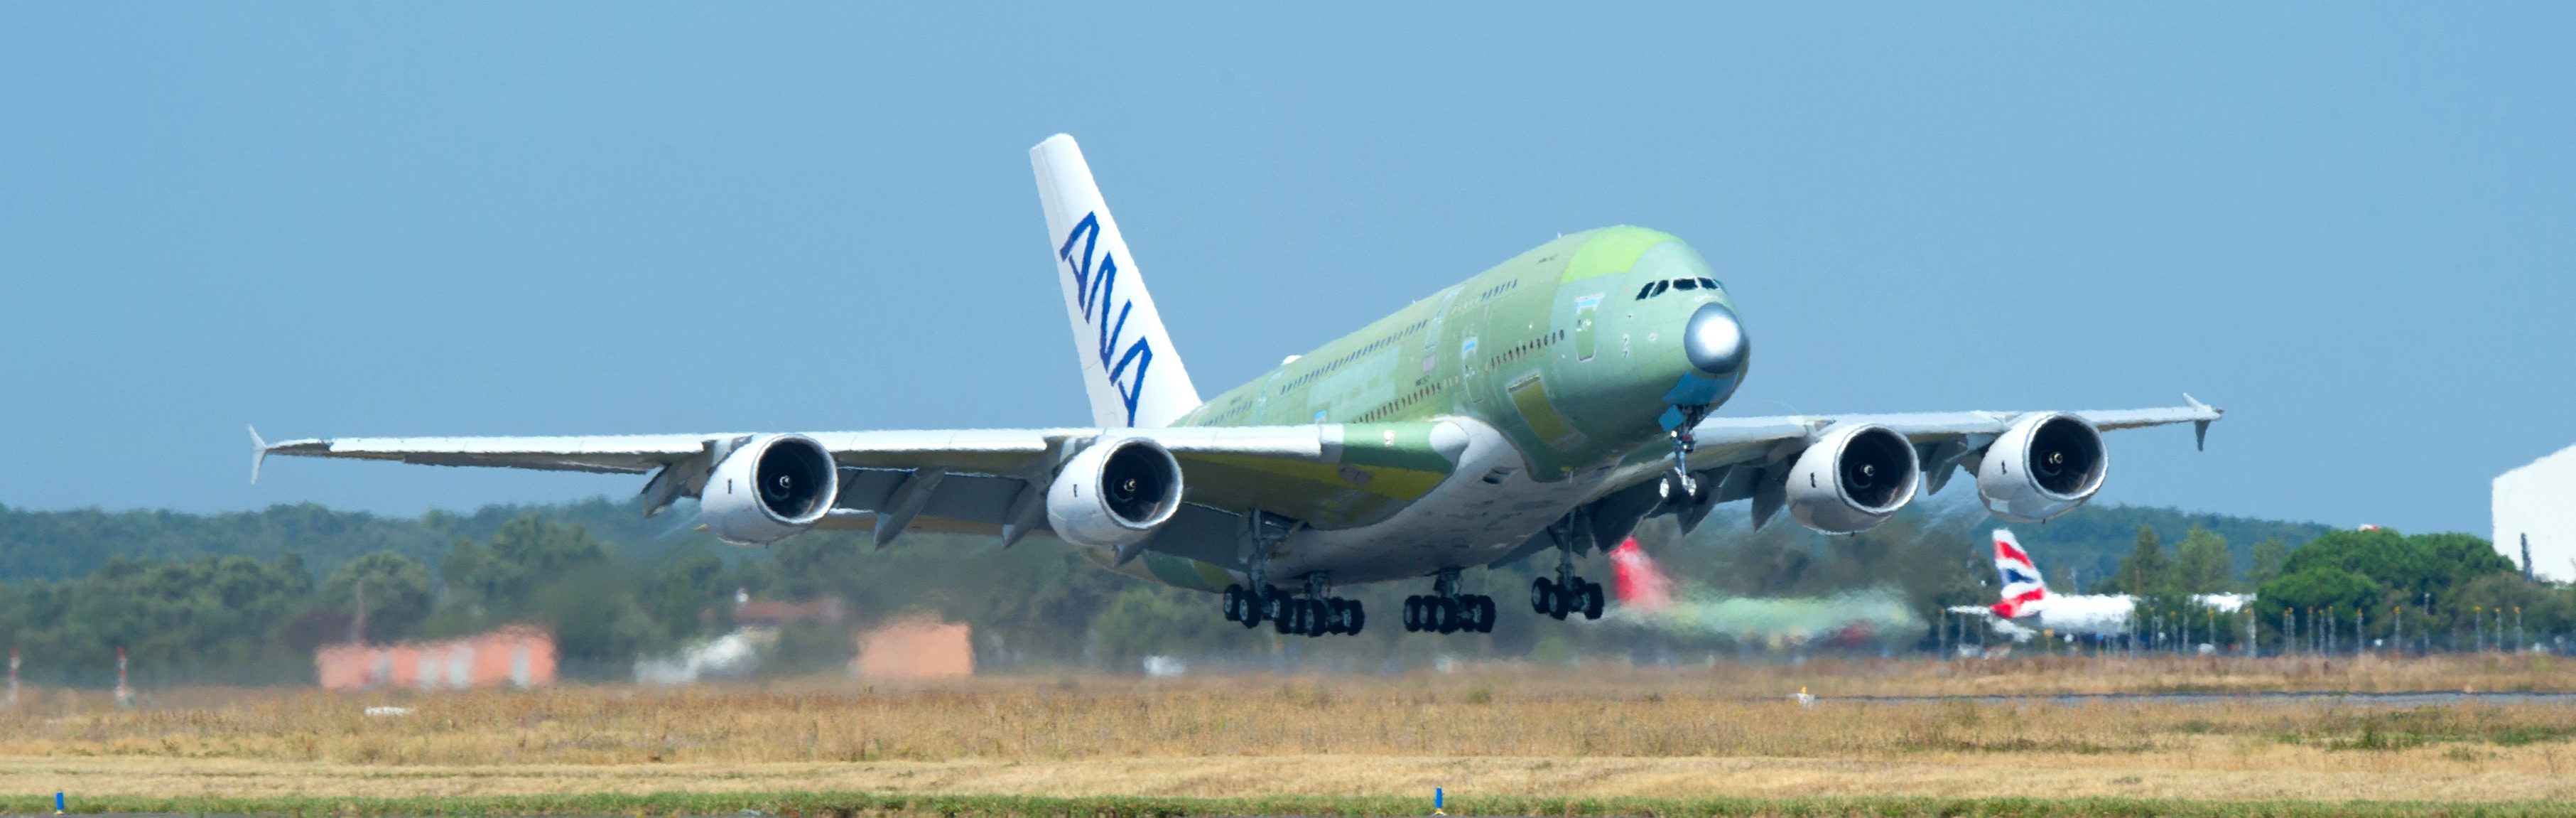 First ANA A380 takes to the skies